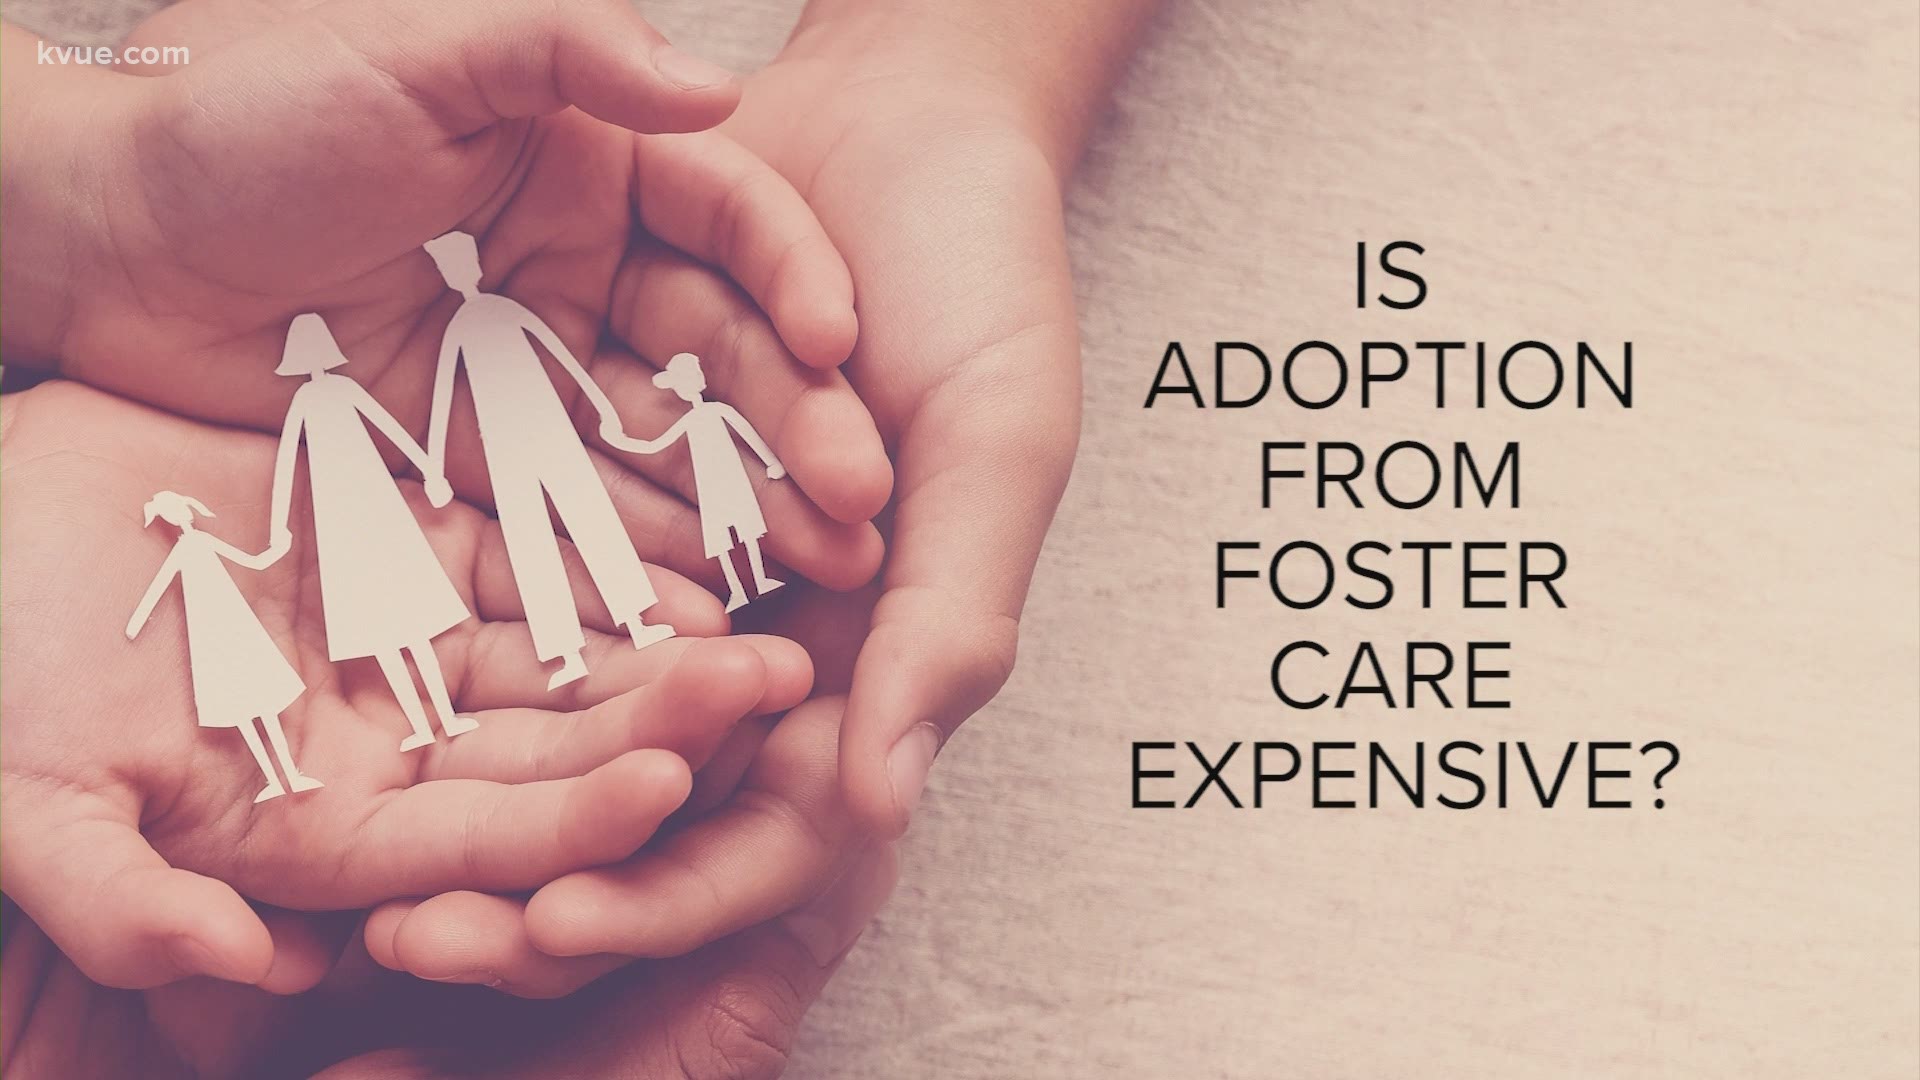 Some local experts believe certain myths and concerns are the biggest reasons why families feel they are not able to help children in Texas foster care.